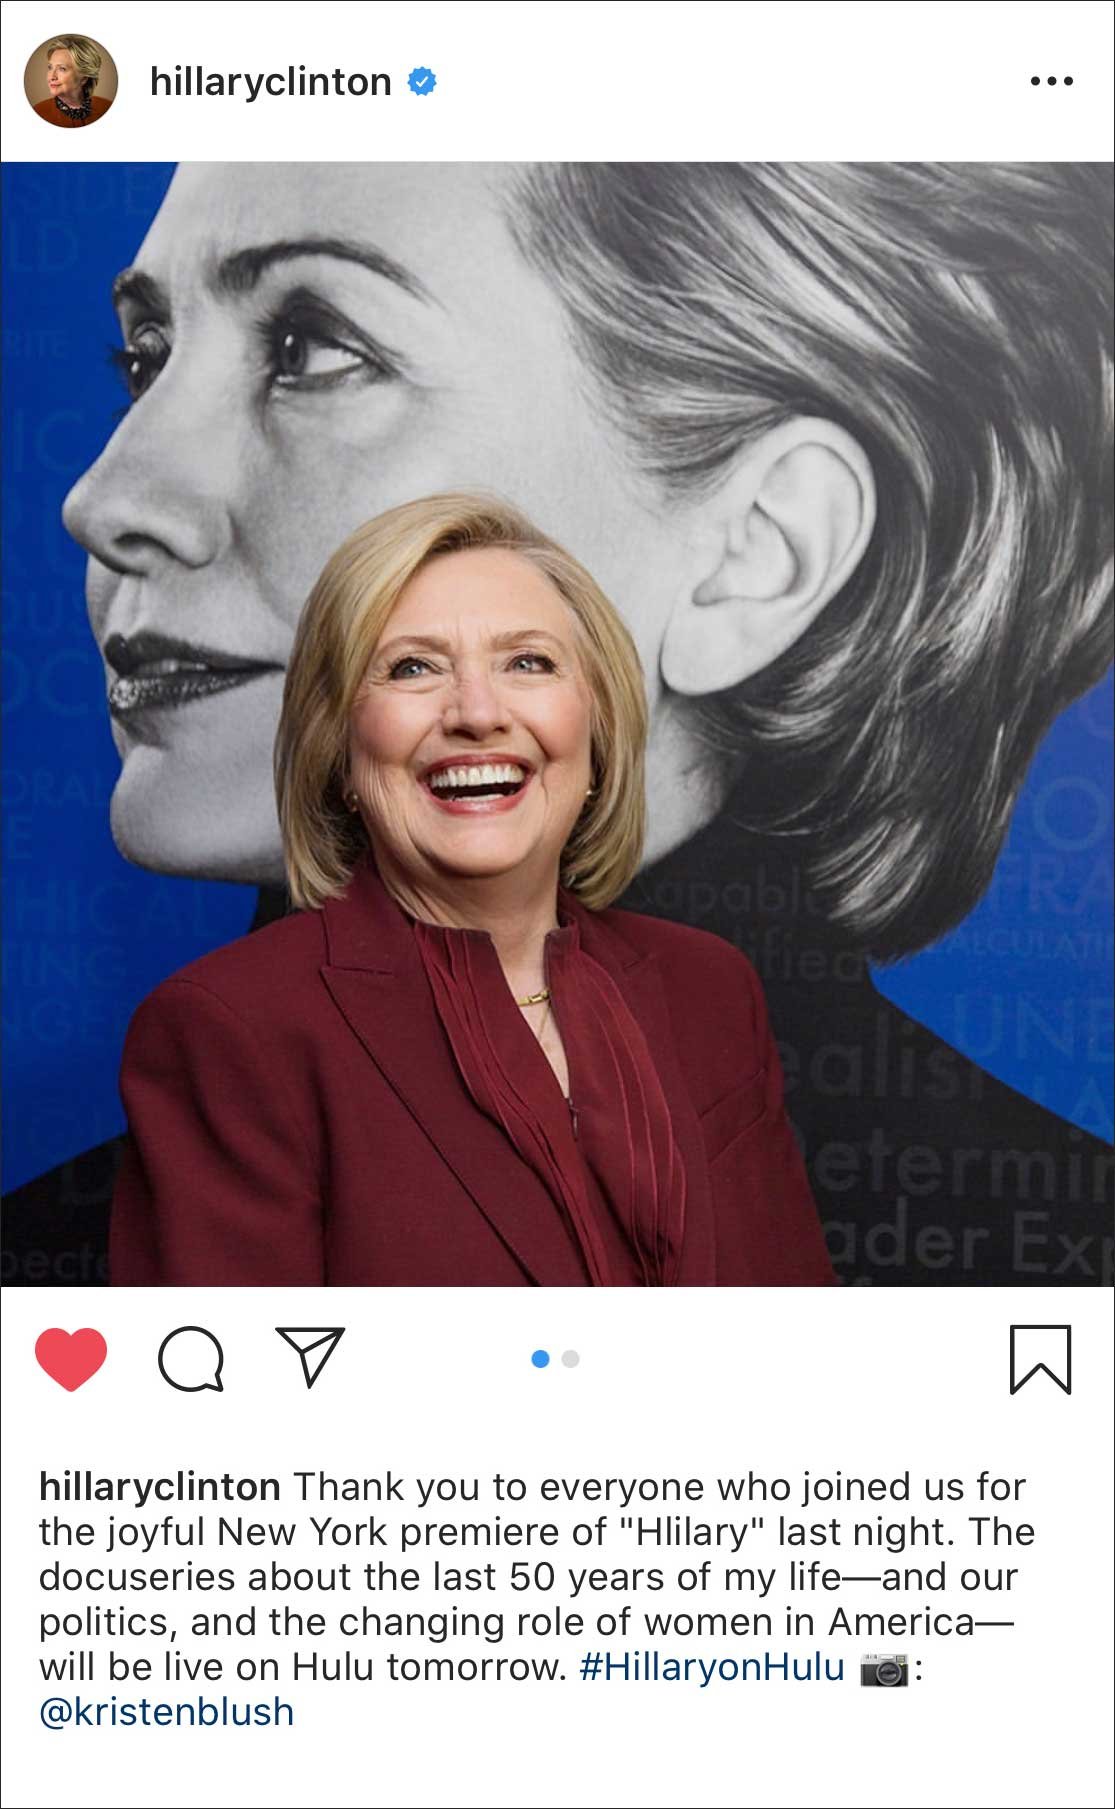  Secretary Hillary Clinton attends the Hulu premier of ‘Hillary’, sharing this photograph to all of her social media platforms, New York, NY 